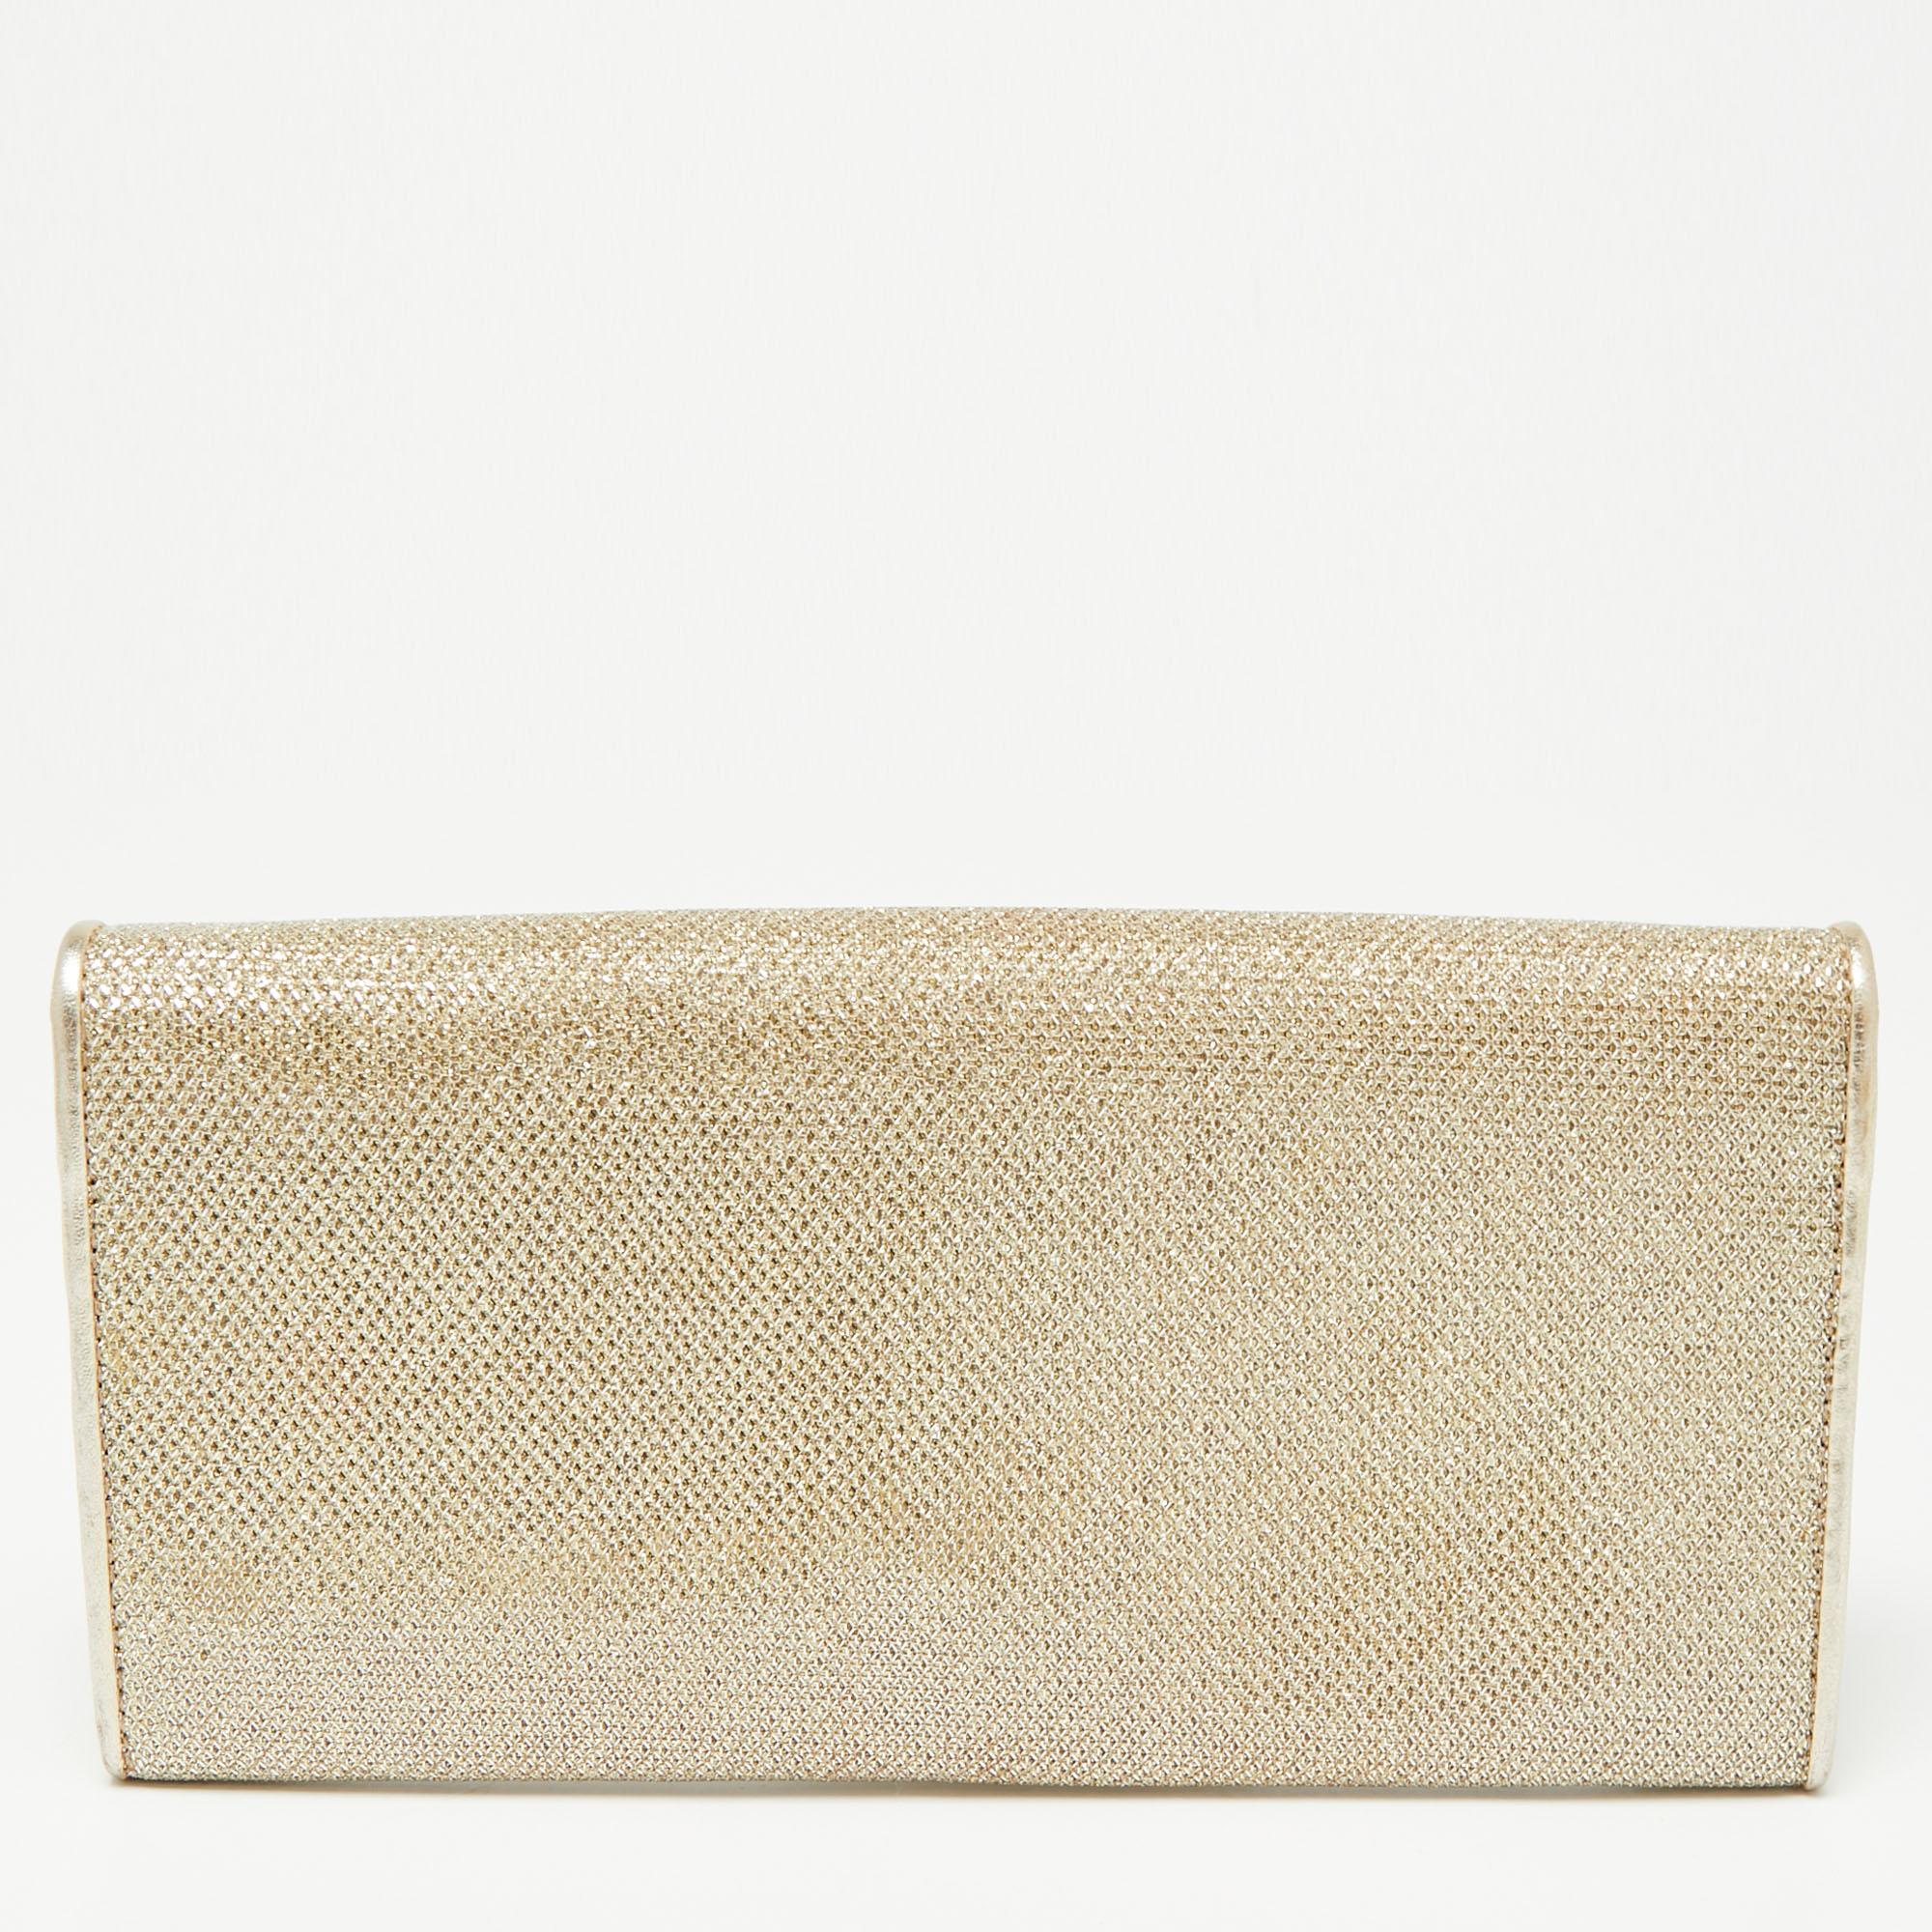 A versatile, modern style with a sleek silhouette, this Jimmy Choo glitter clutch is a great party piece. It features a compact interior of fabric and leather. A glamorous design, it is complete with matching gold-tone hardware.

Includes: Original